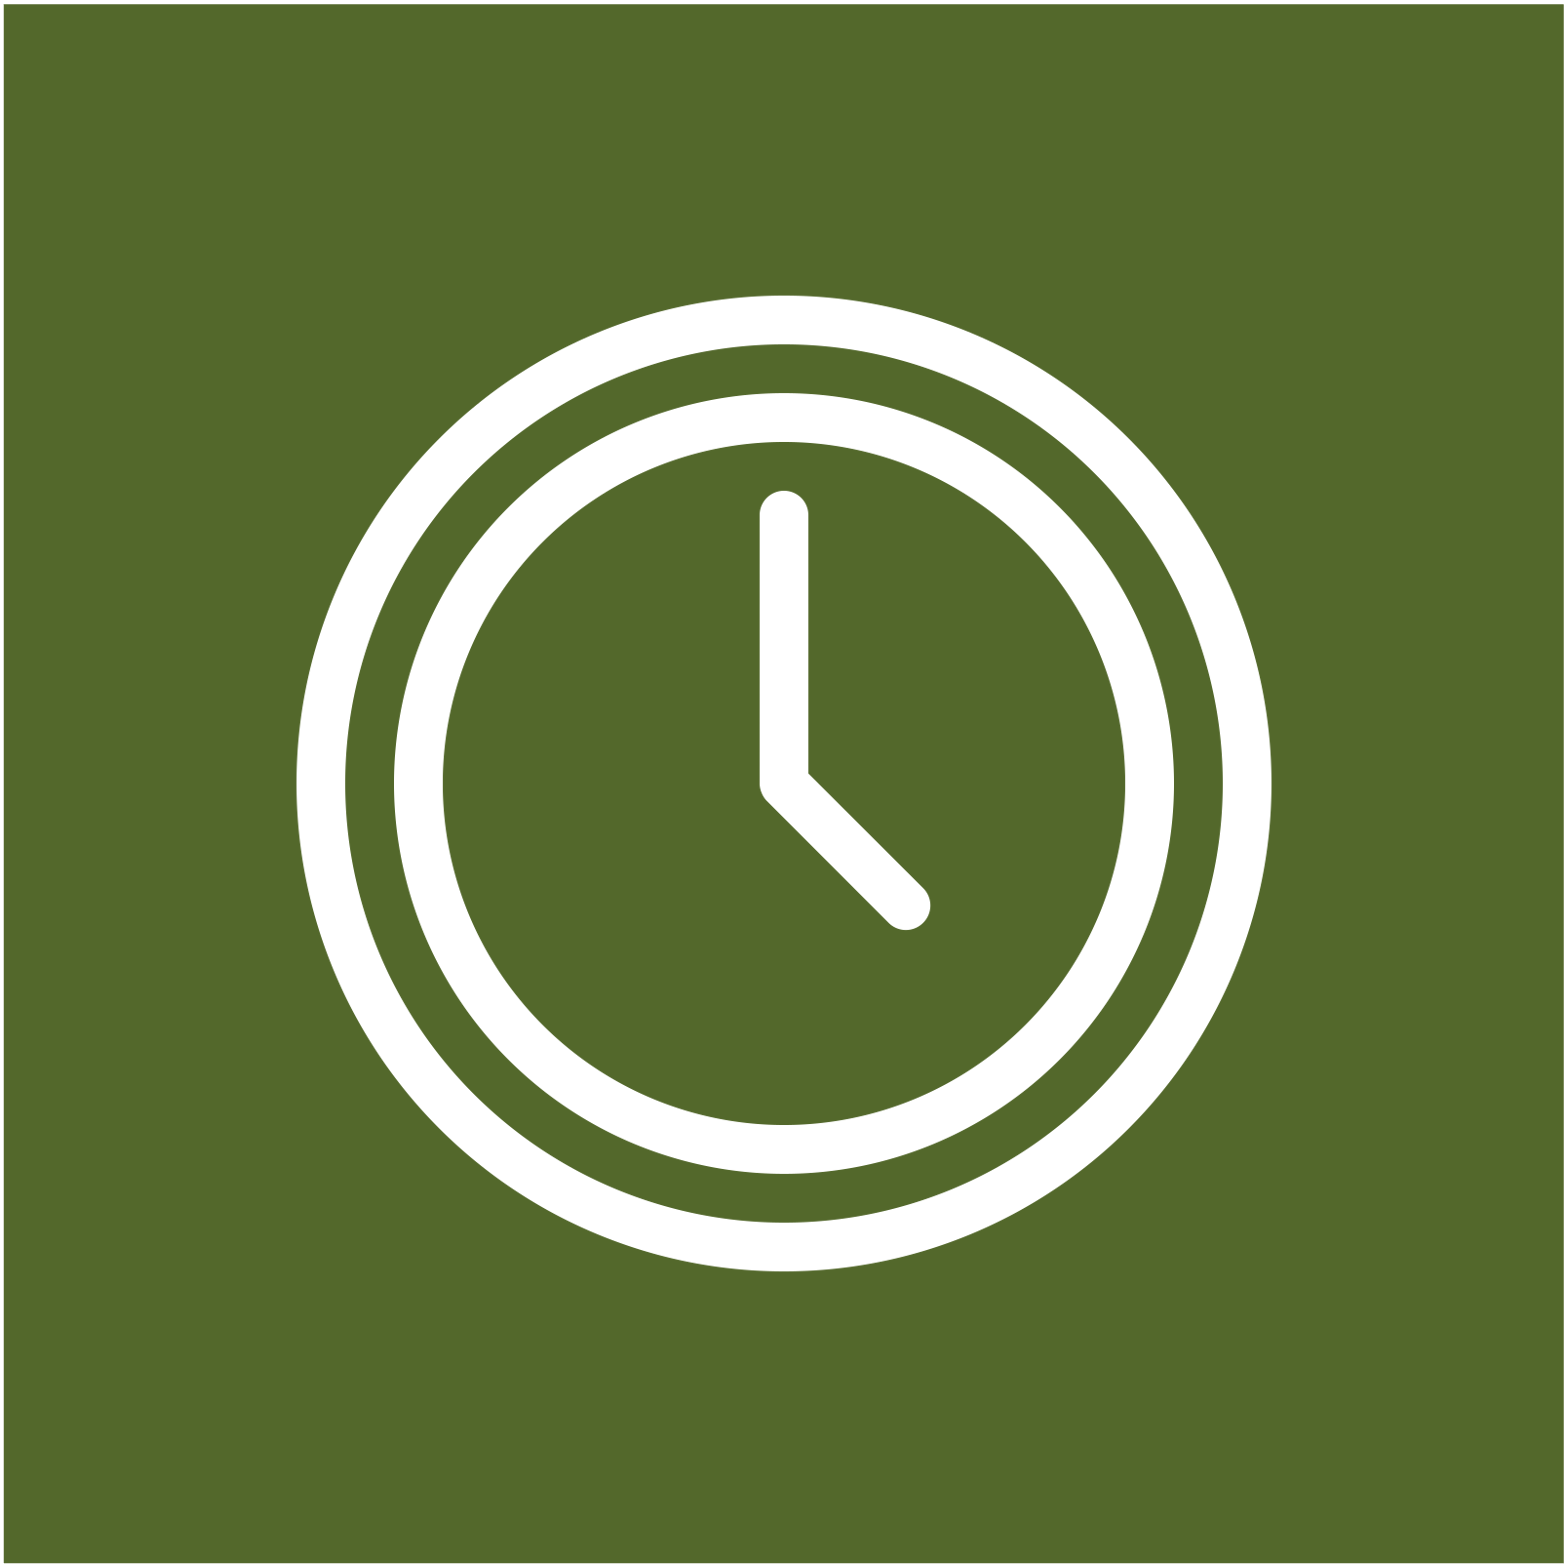 UOB - Flexible working hours icon.png